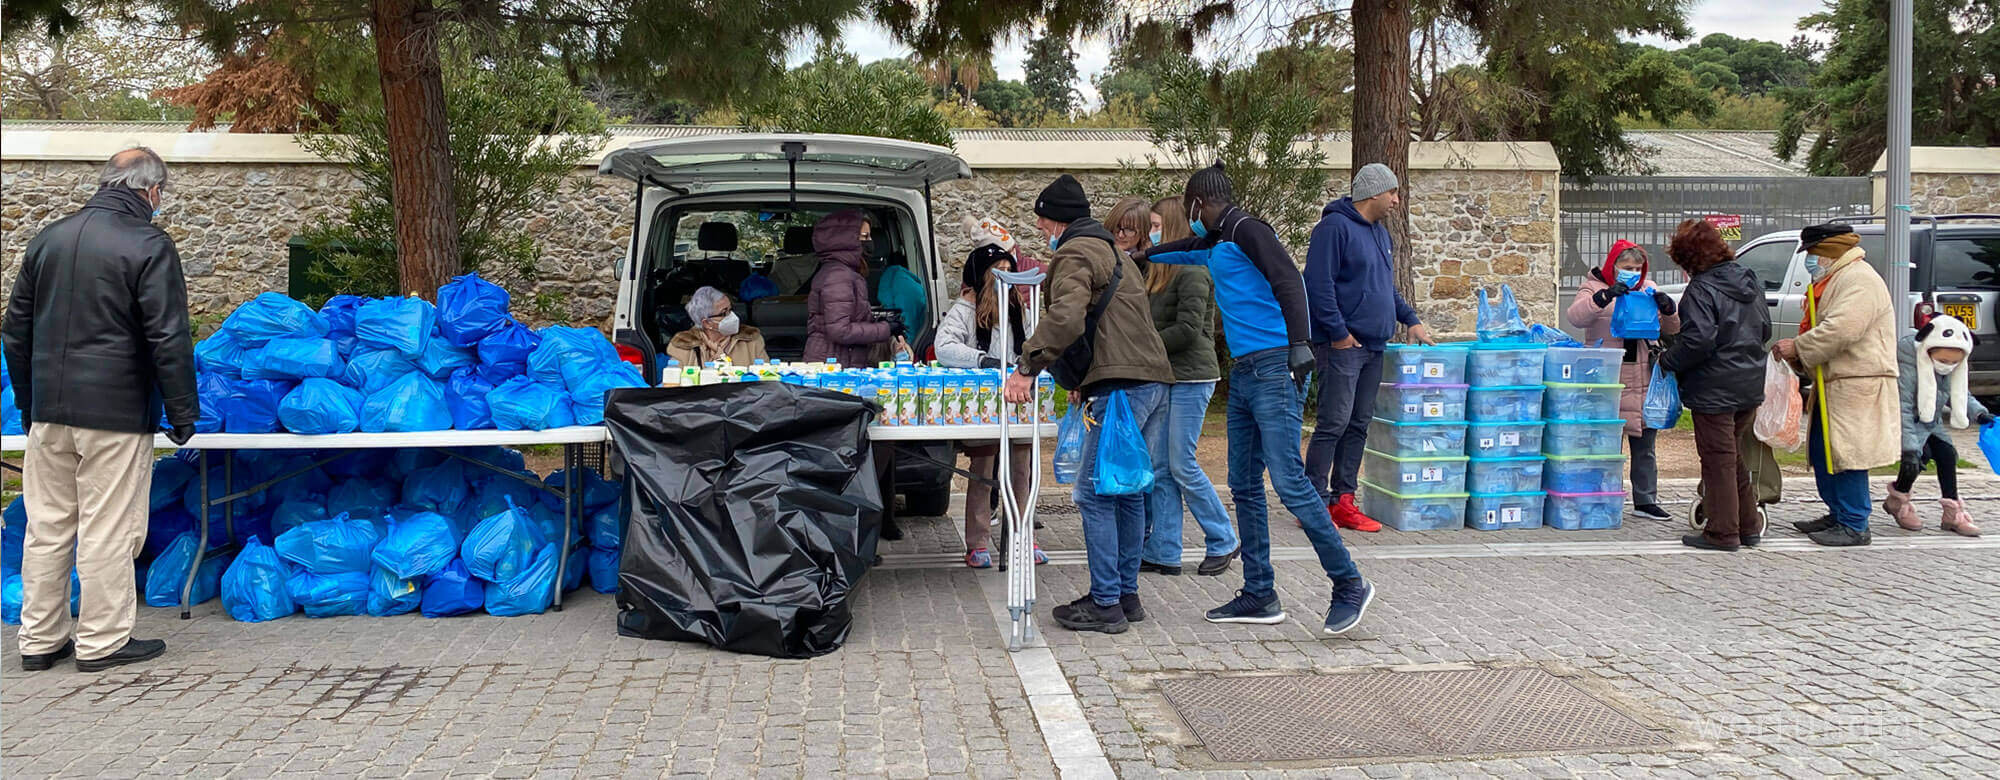 Distribution of food parcels in Athens, Greece during the Covid-19 lockdown